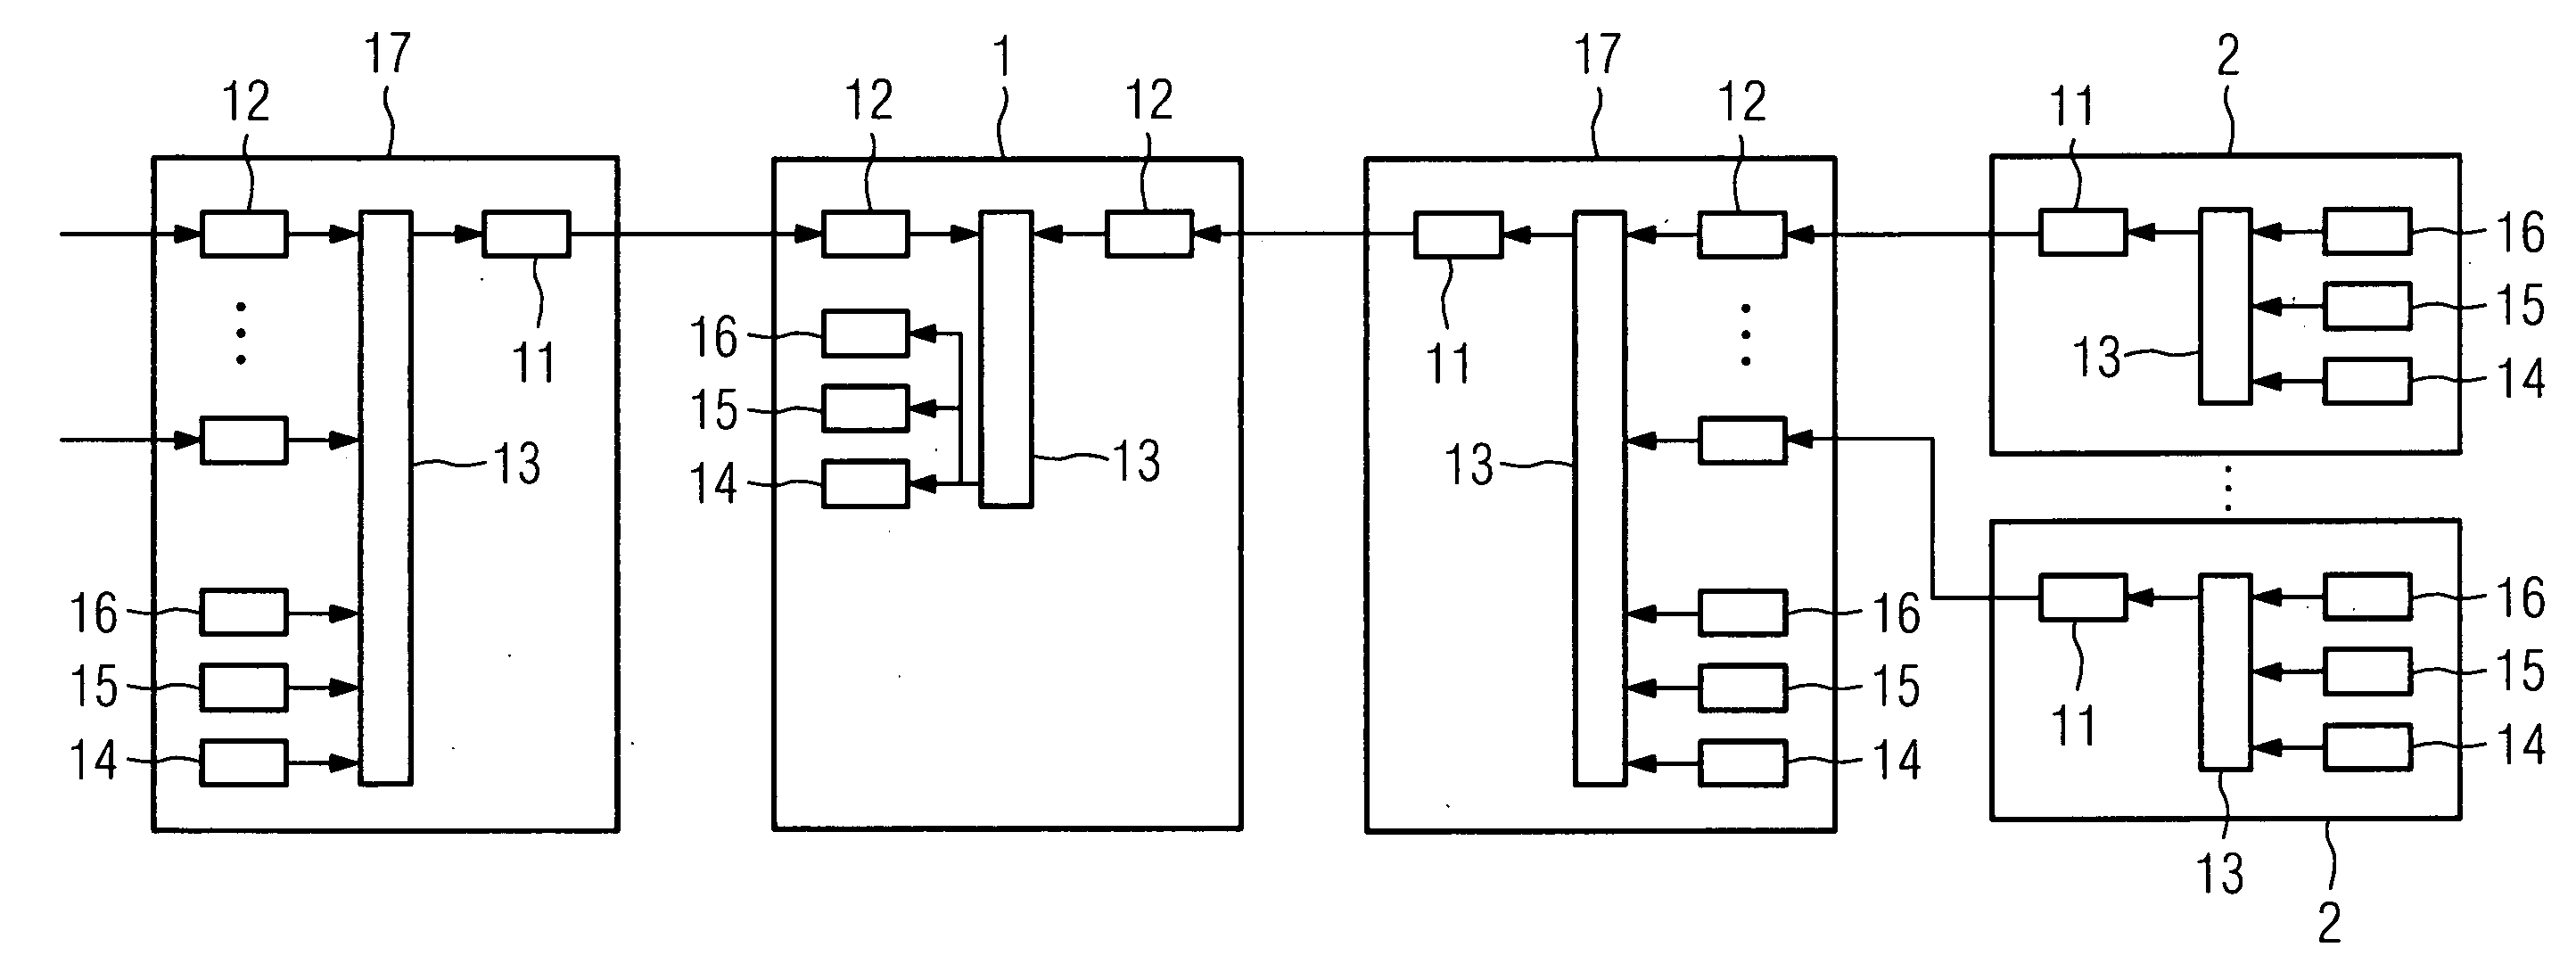 Event signaling between peripheral modules and a processing unit